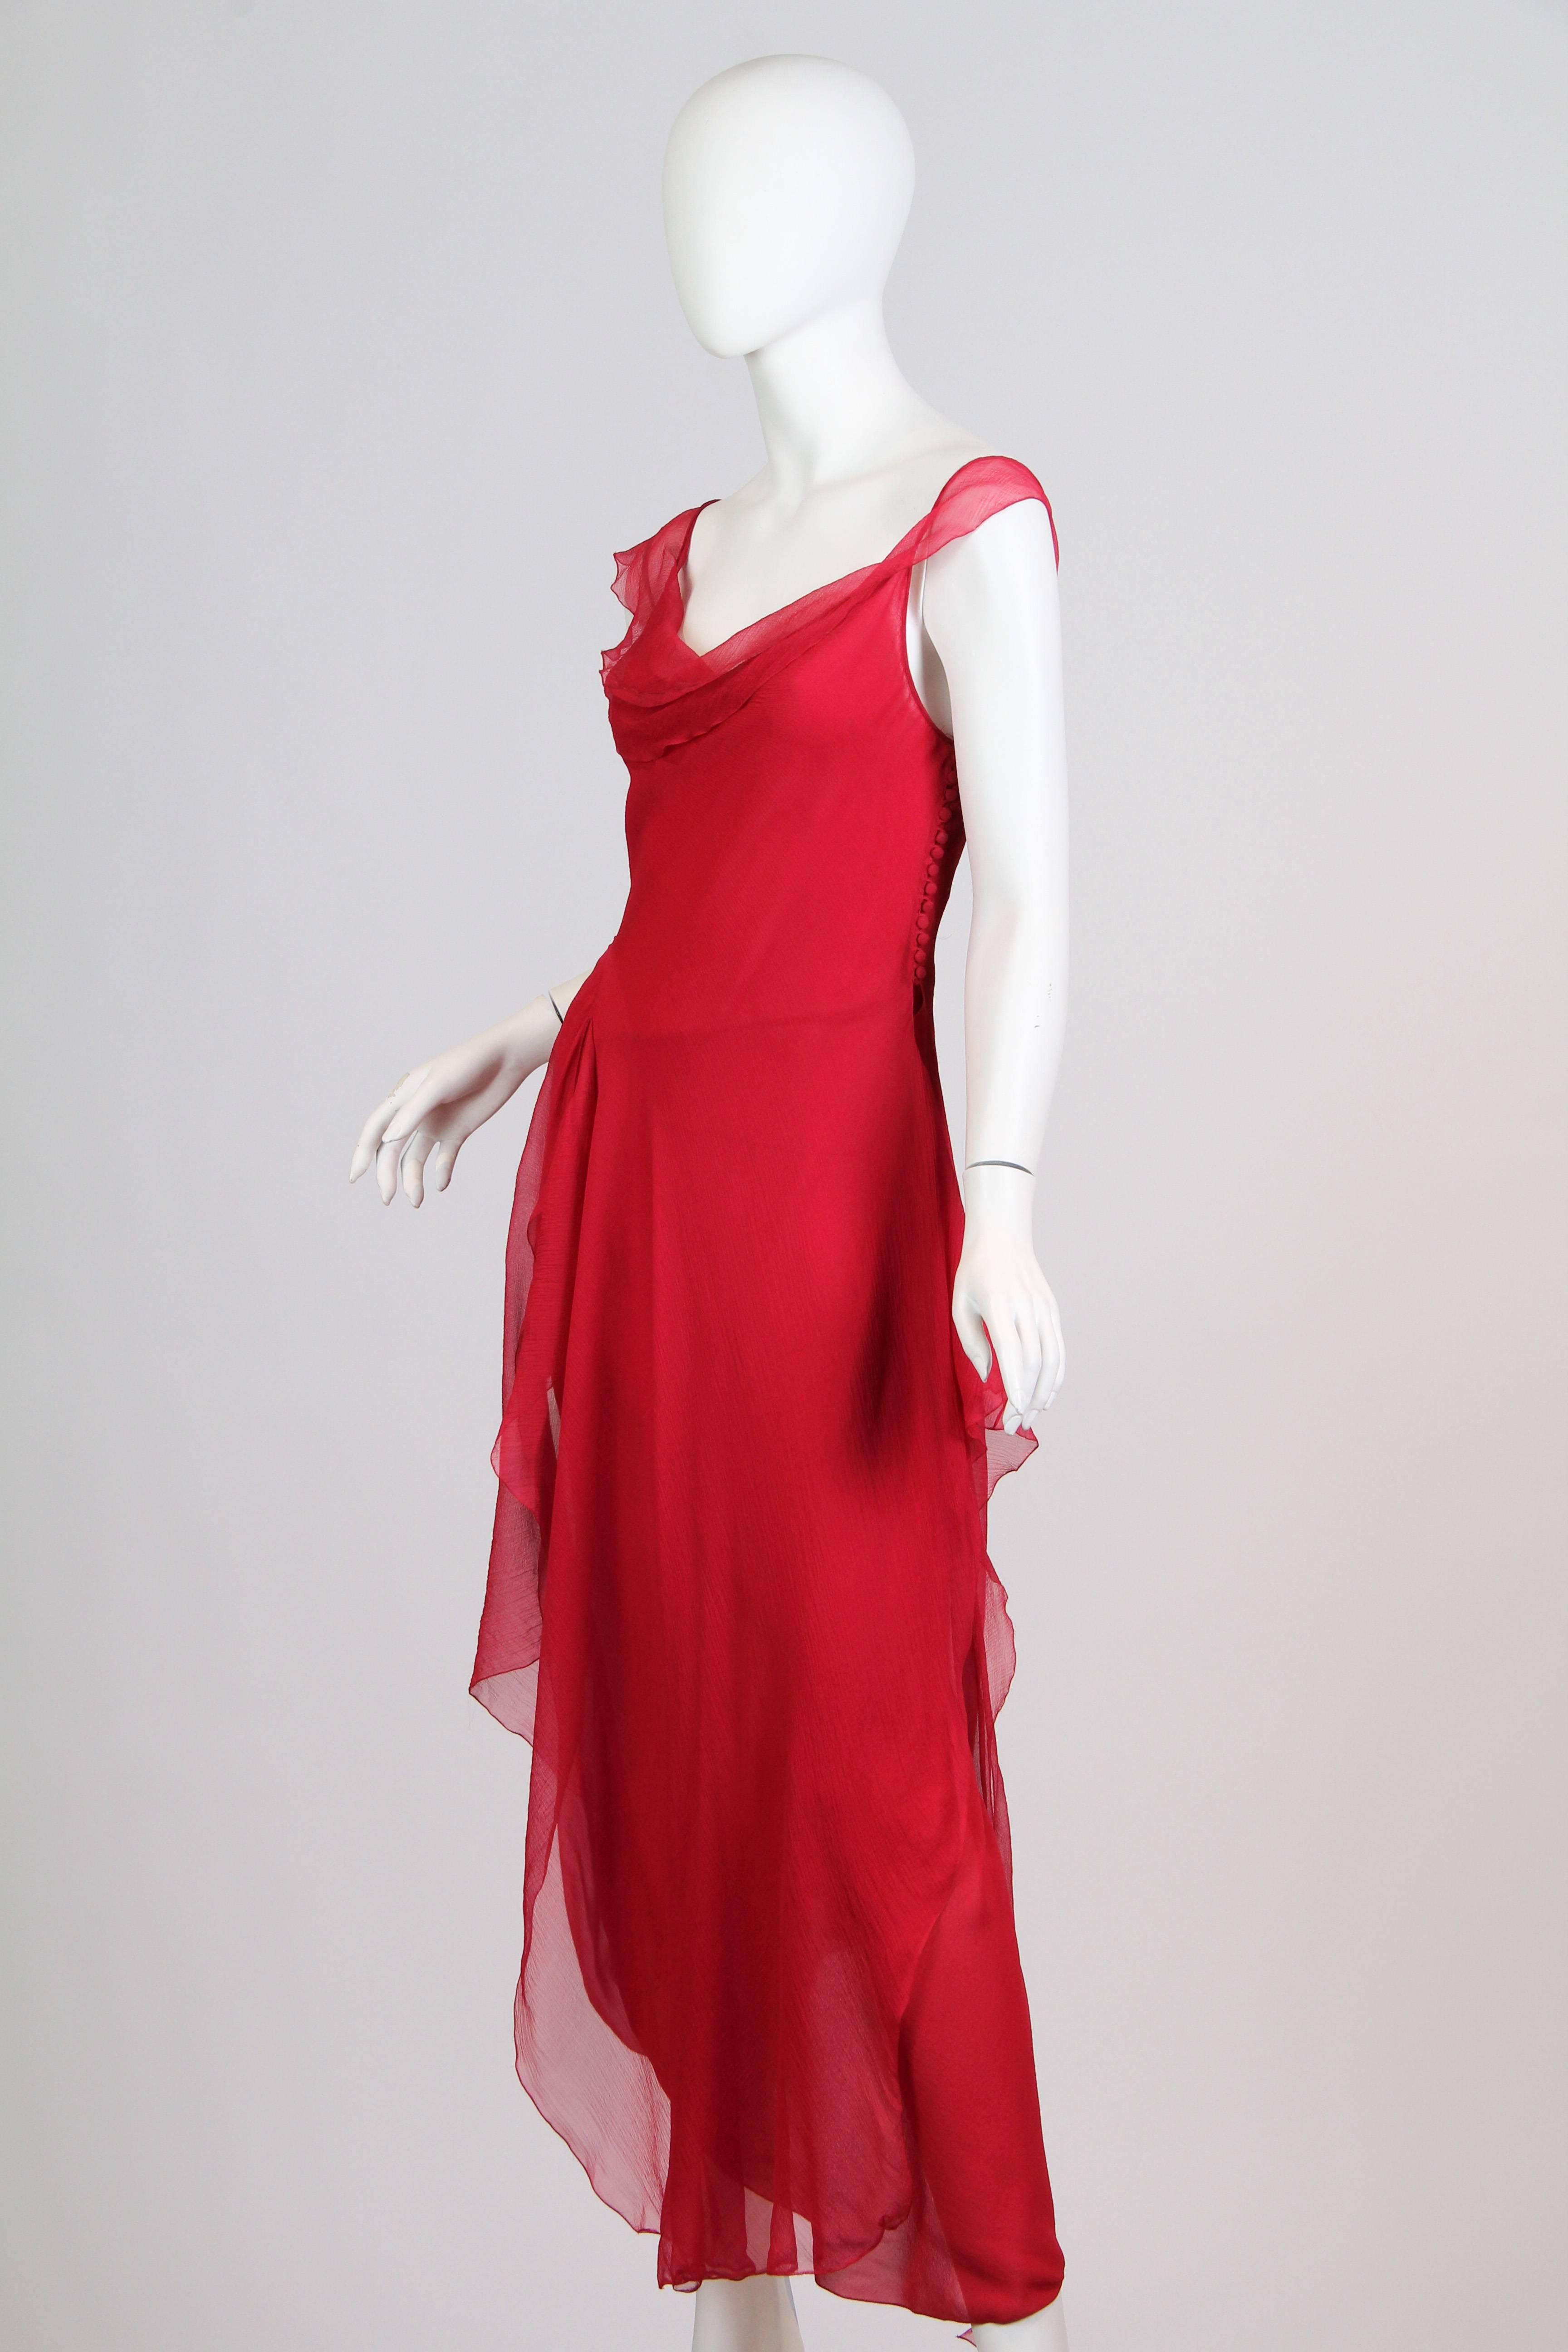 Iconic bias cut dress from John Galliano. Silk crepe de chine overlaid with delicate chiffon with asymmetrical ruffles and signature decorative row of buttons down the side.